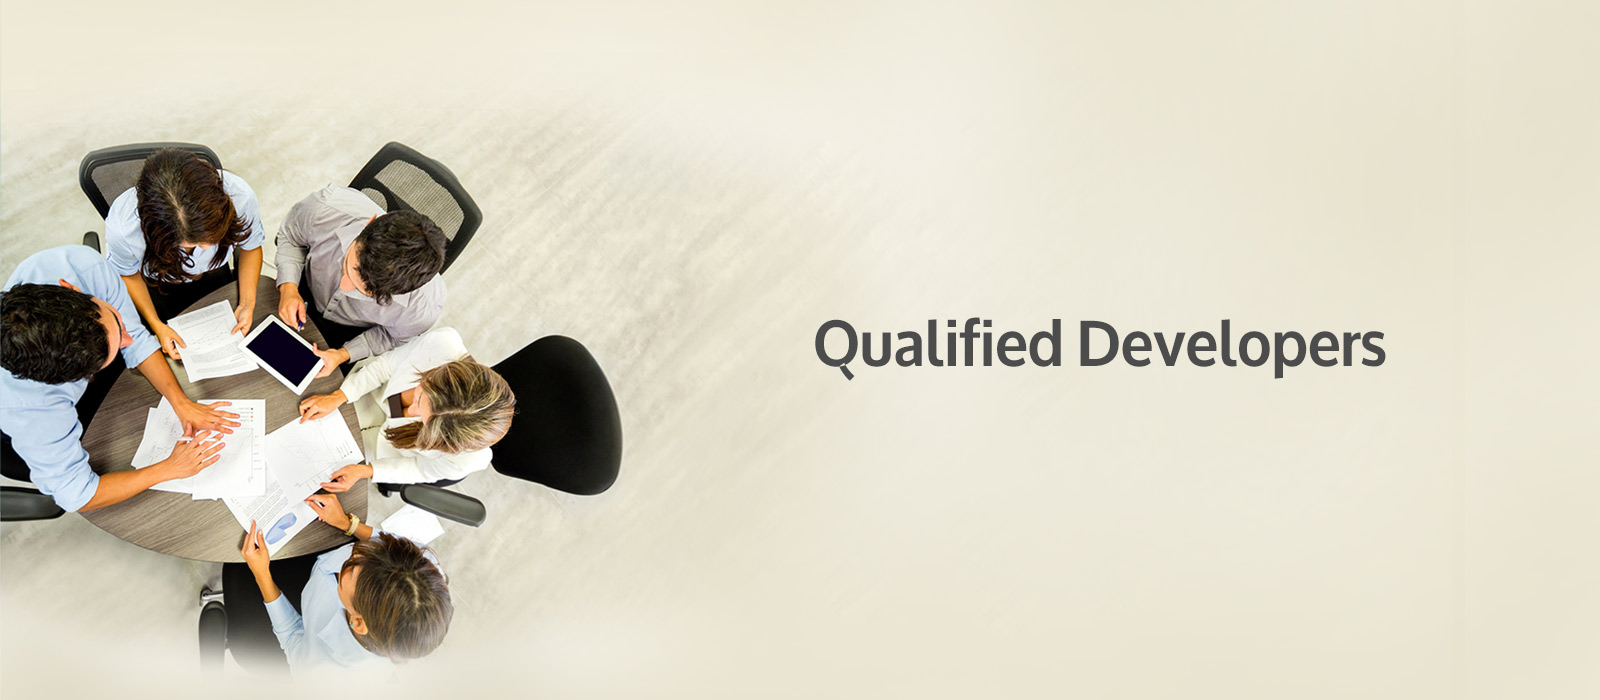 Qualified Developers